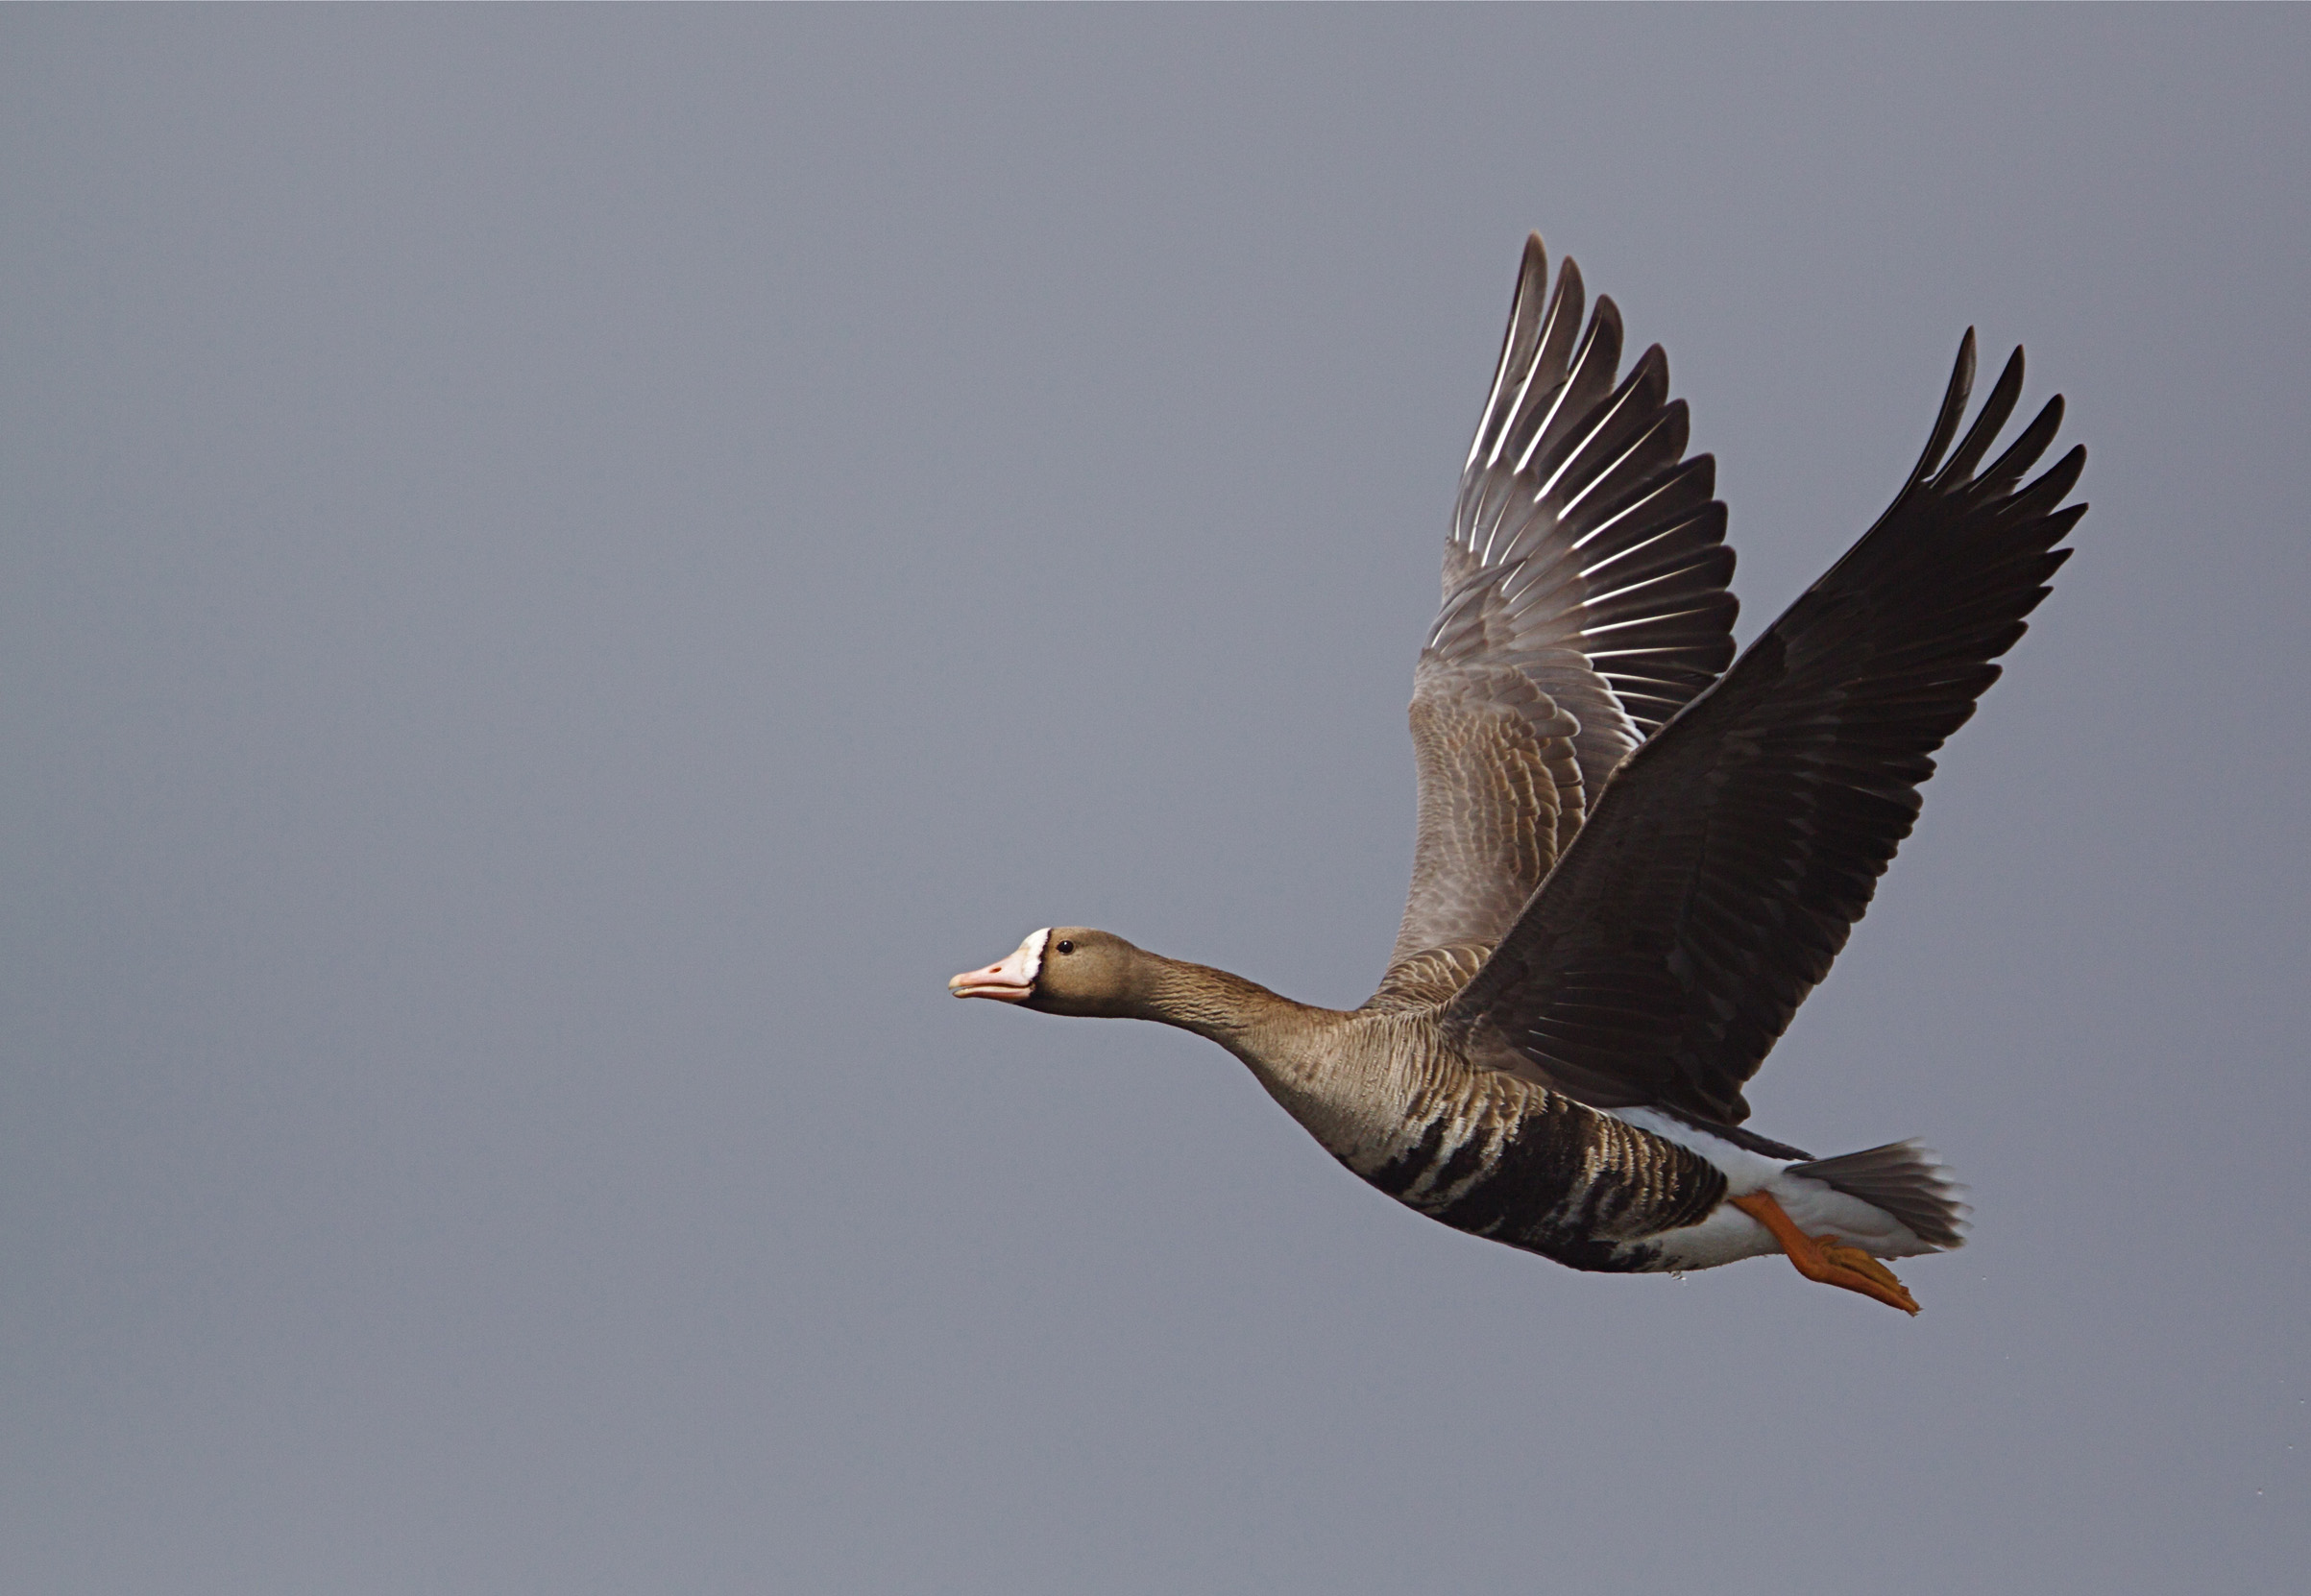 Dark grey goose with a pale pink bill and orange feet, in mid flight with wings outstretched 